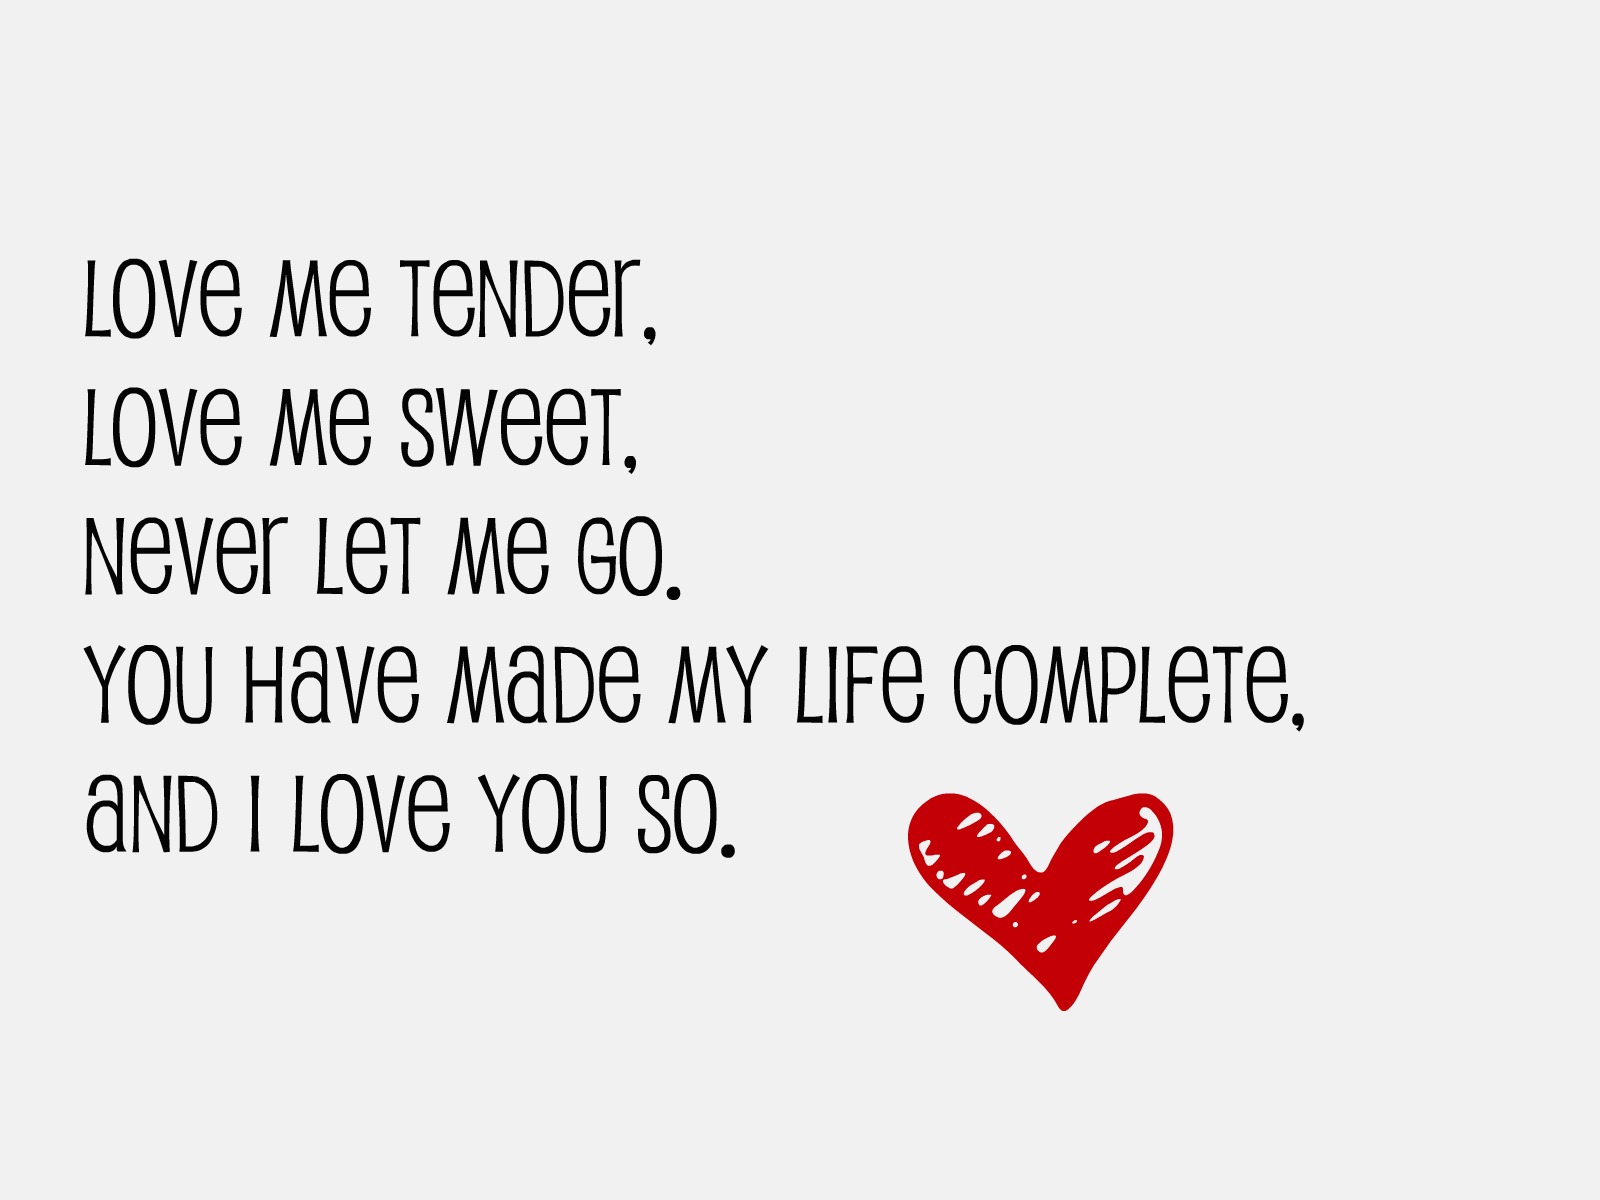 Me лове. Love me tender Love me Sweet. Love tender текст. Love me tender презентация. I Love you so please Let me go текст.